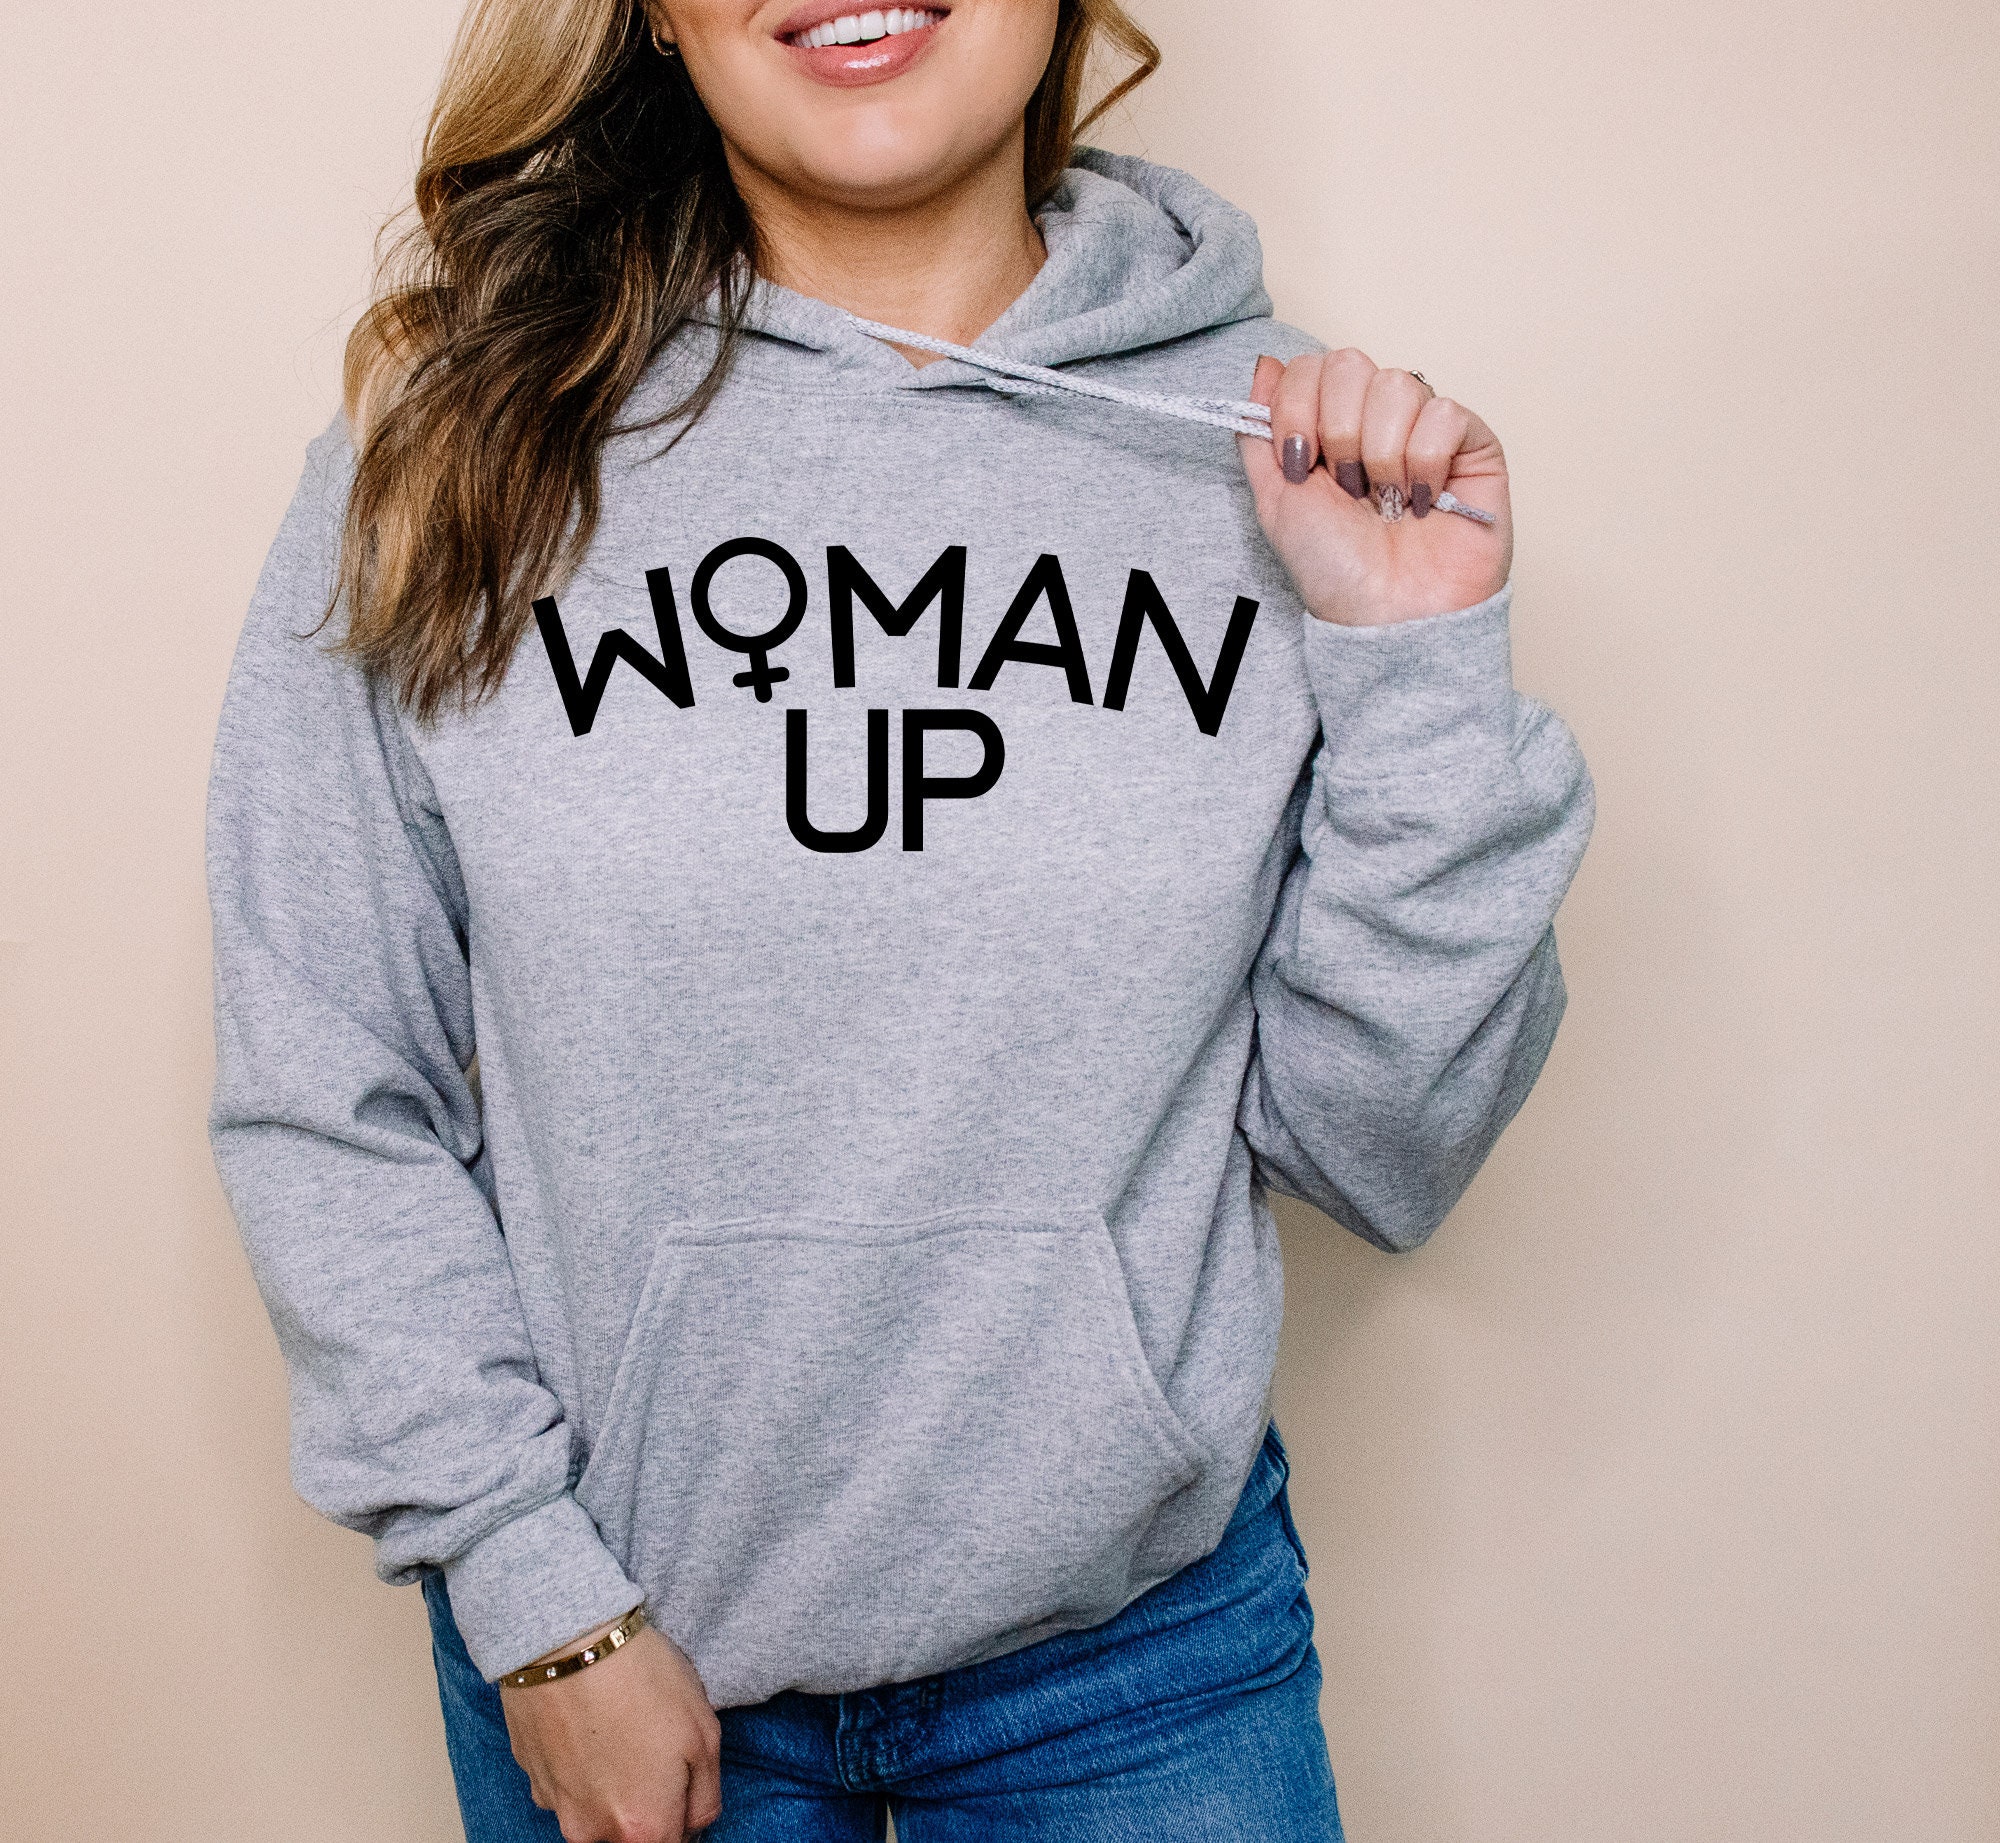 Discover Woman Up Adult and Youth Feminist Graphic Tee, Crewneck Sweatshirt, Pullover Hoodie, Woman Up Strong Woman Shirt